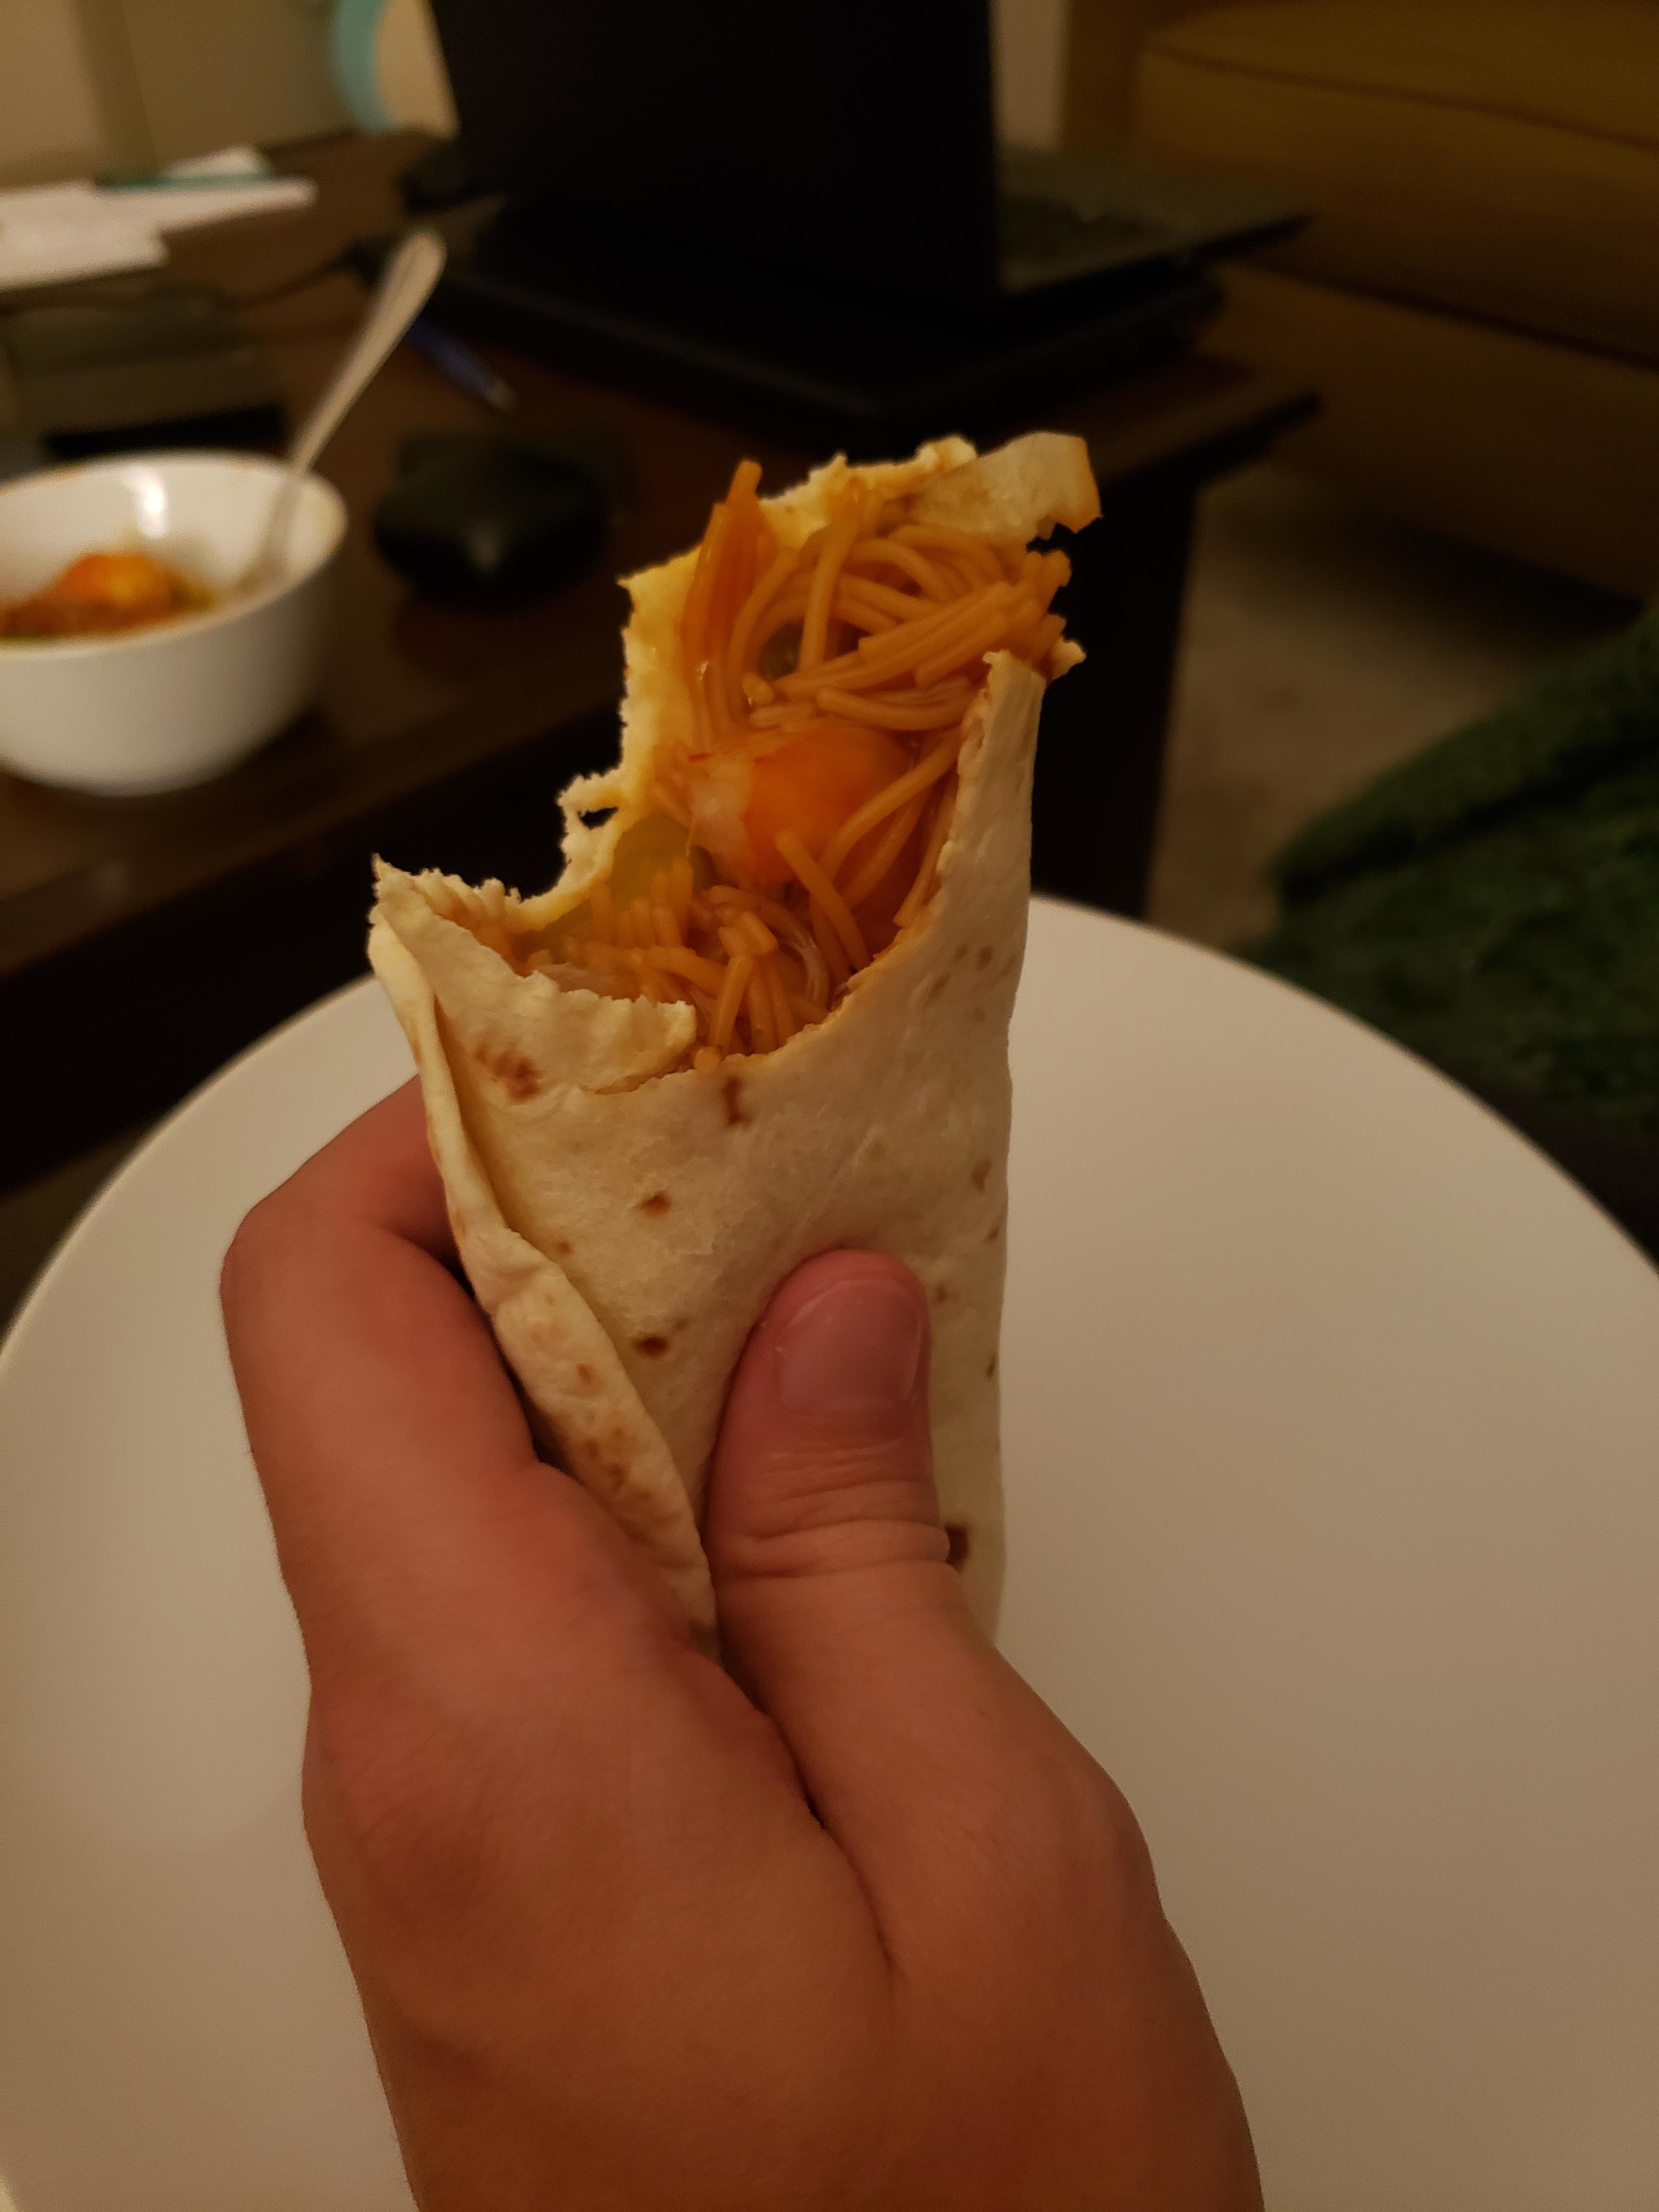 a tortilla stuffed with noodles and vegetables